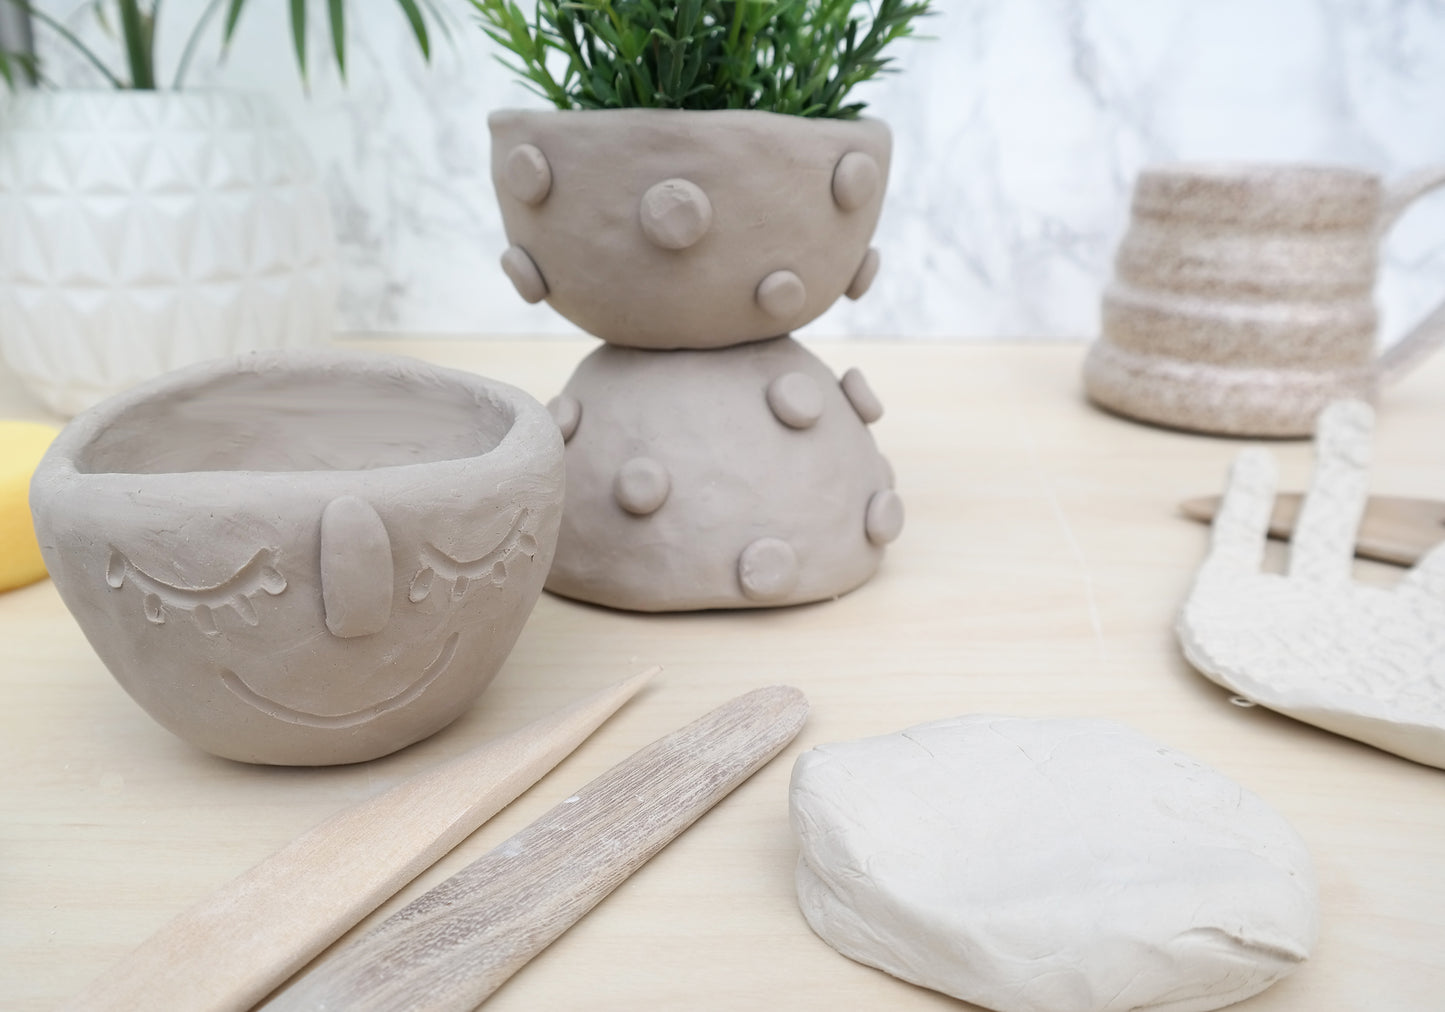 Big pottery set with air-dry-clay. Pottery at home. The big air dry clay kit  – Mesh & Cloth